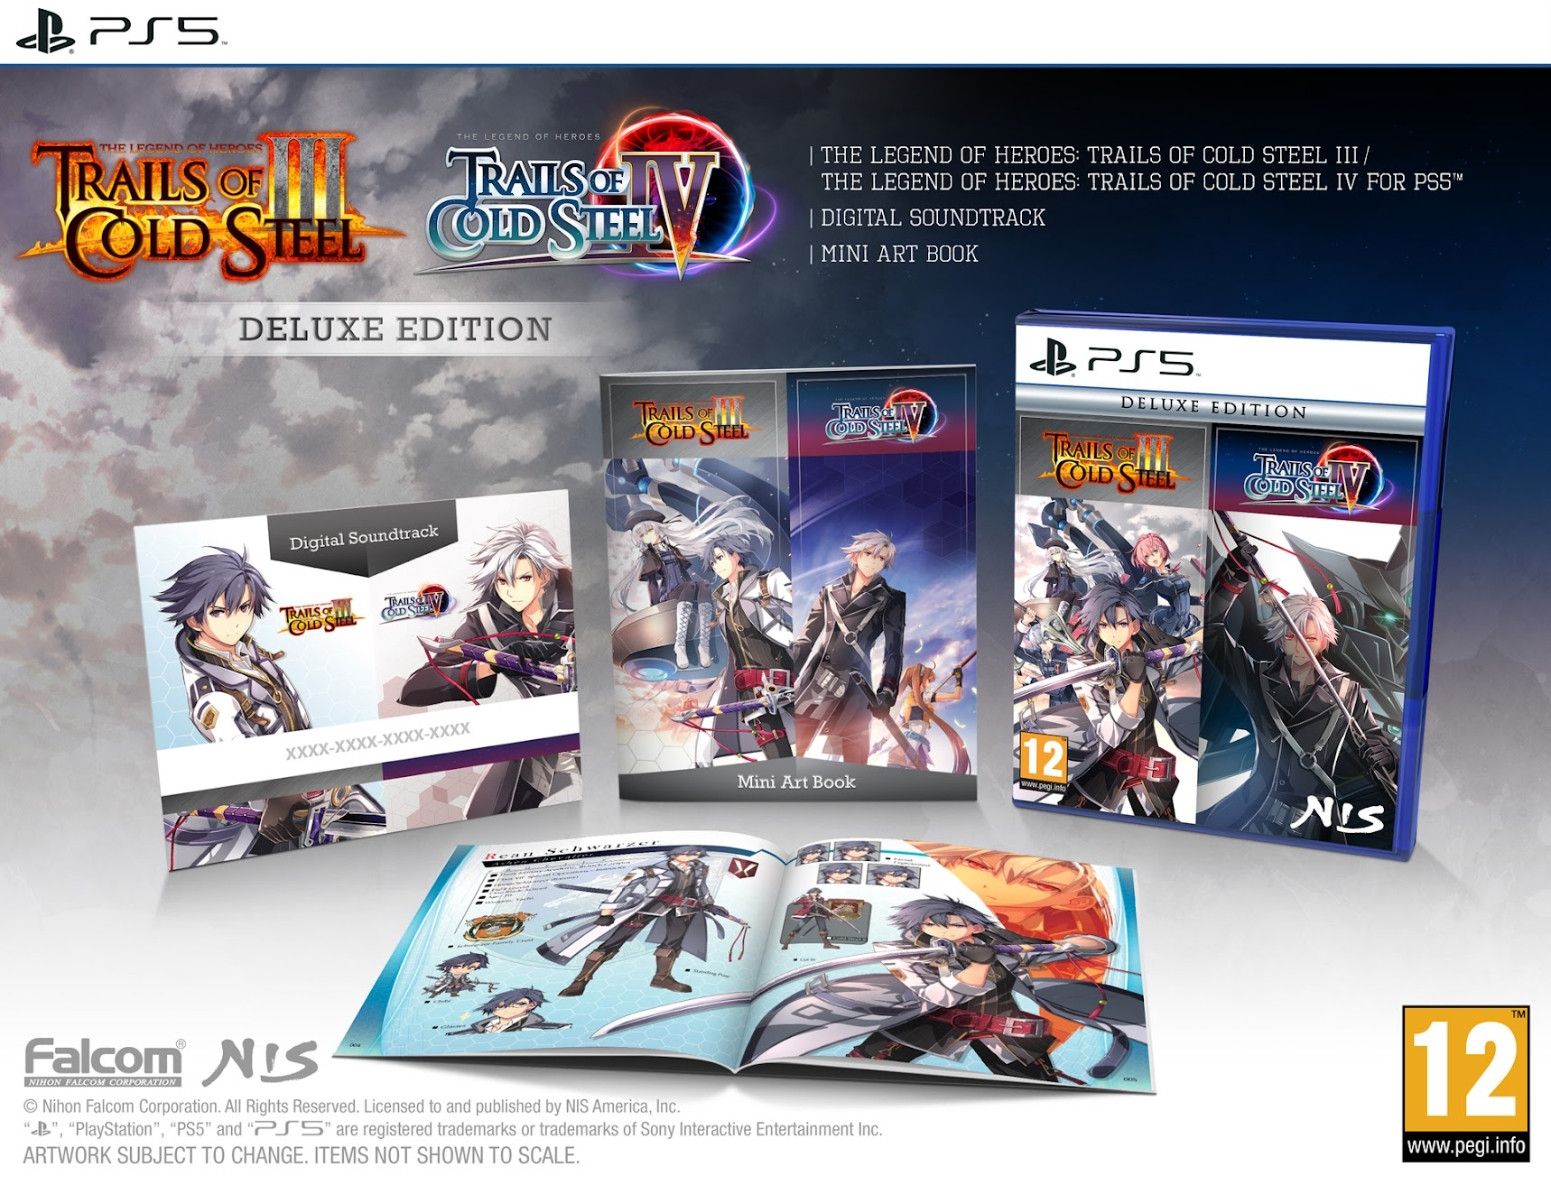 The Legend of Heroes: Trails of Cold Steel III + IV - Deluxe Edition (PS5), NIS America